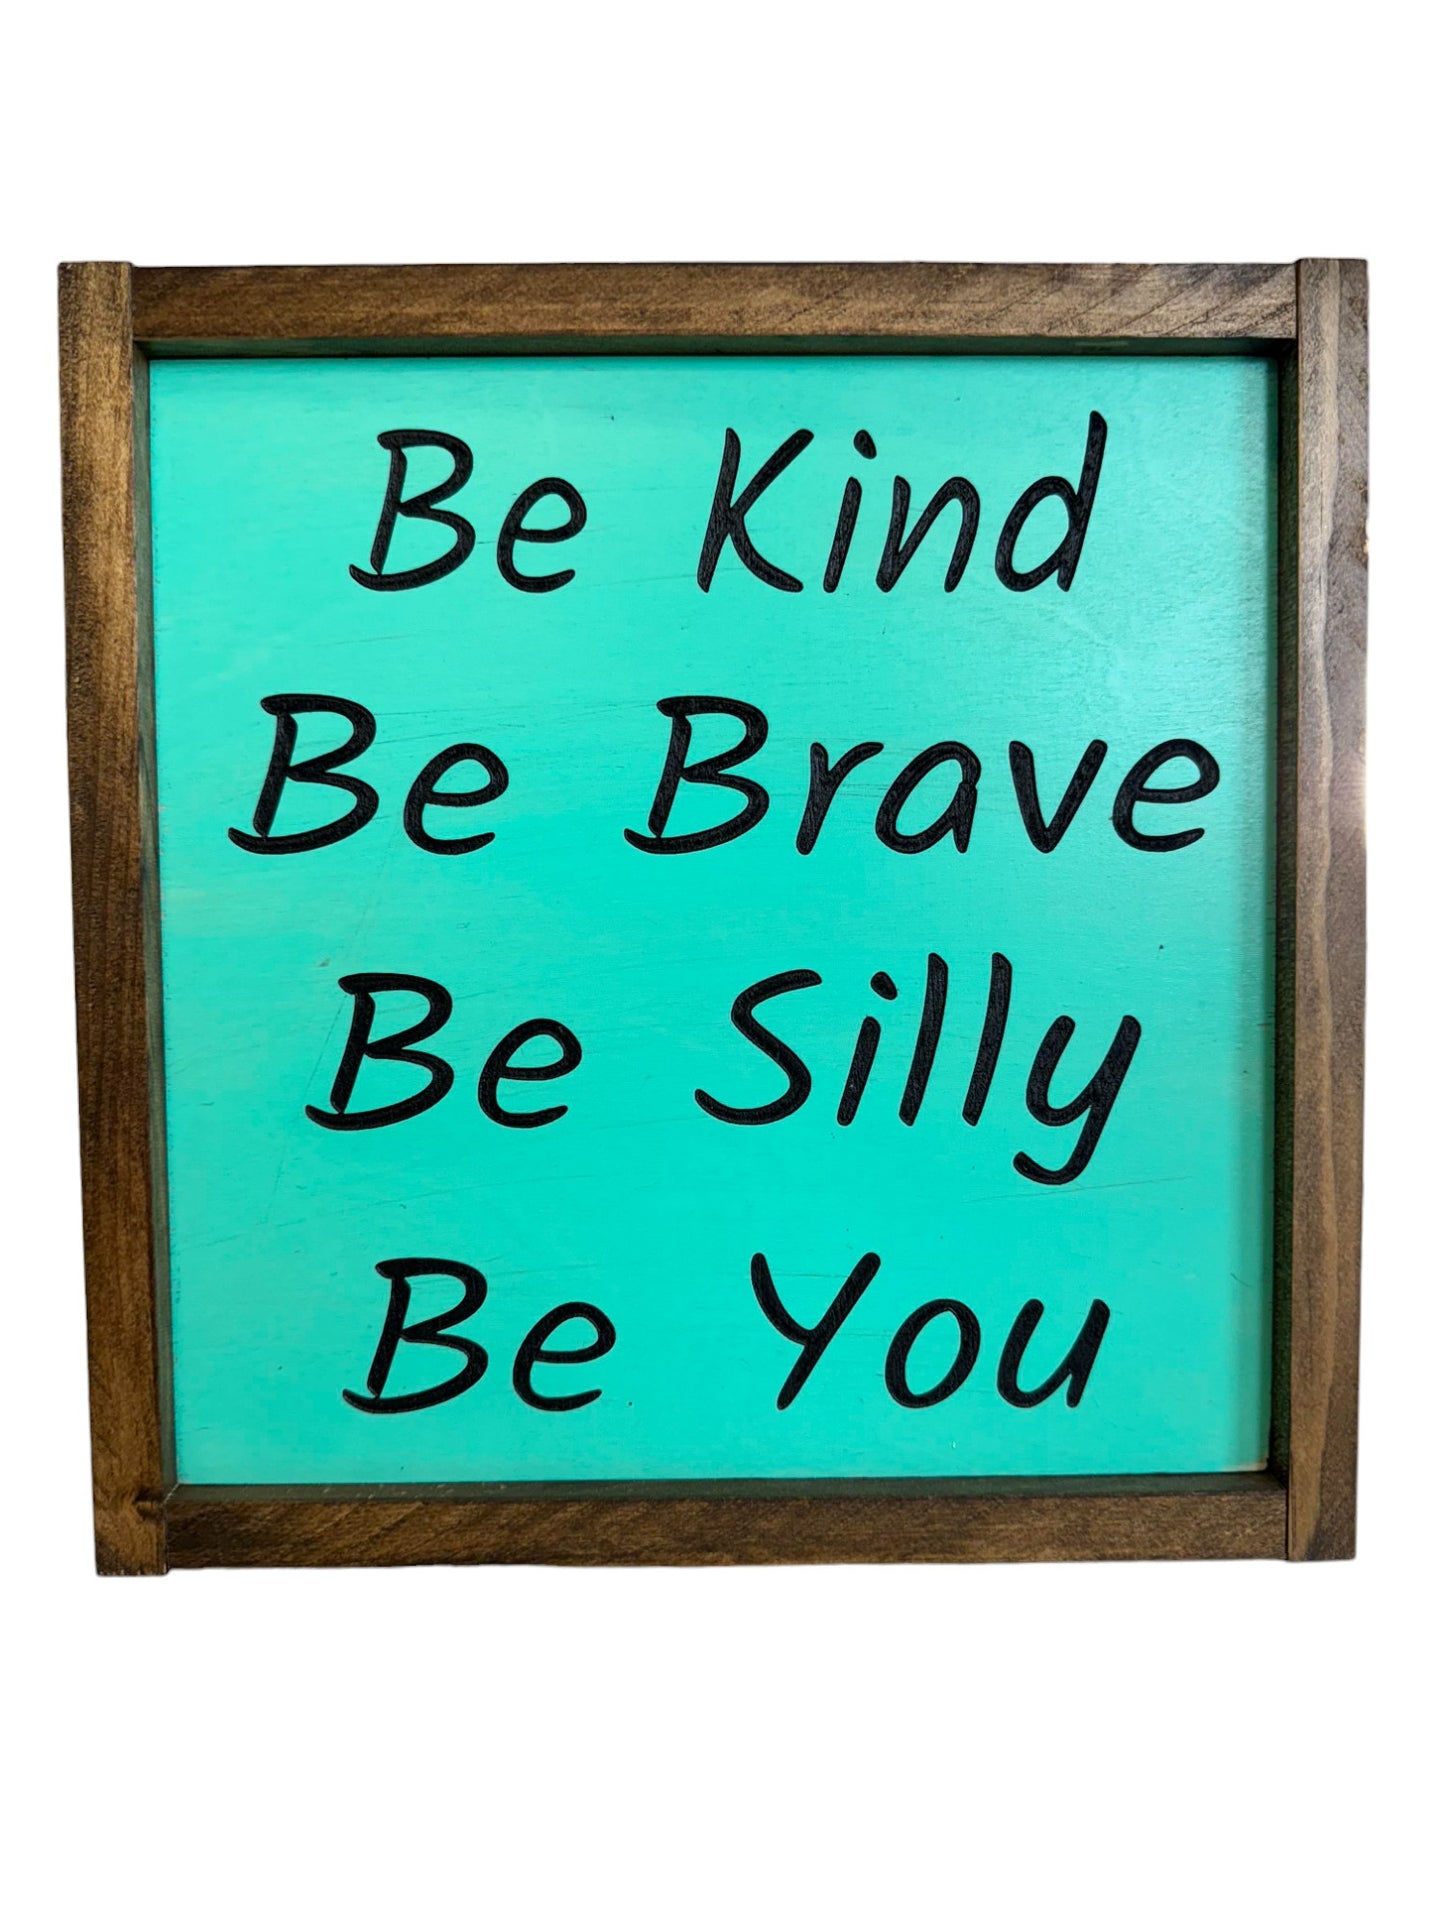 Be Kind Be Brave Be Silly Be Kind Carved Wood Sign - Inspirational Room Decor